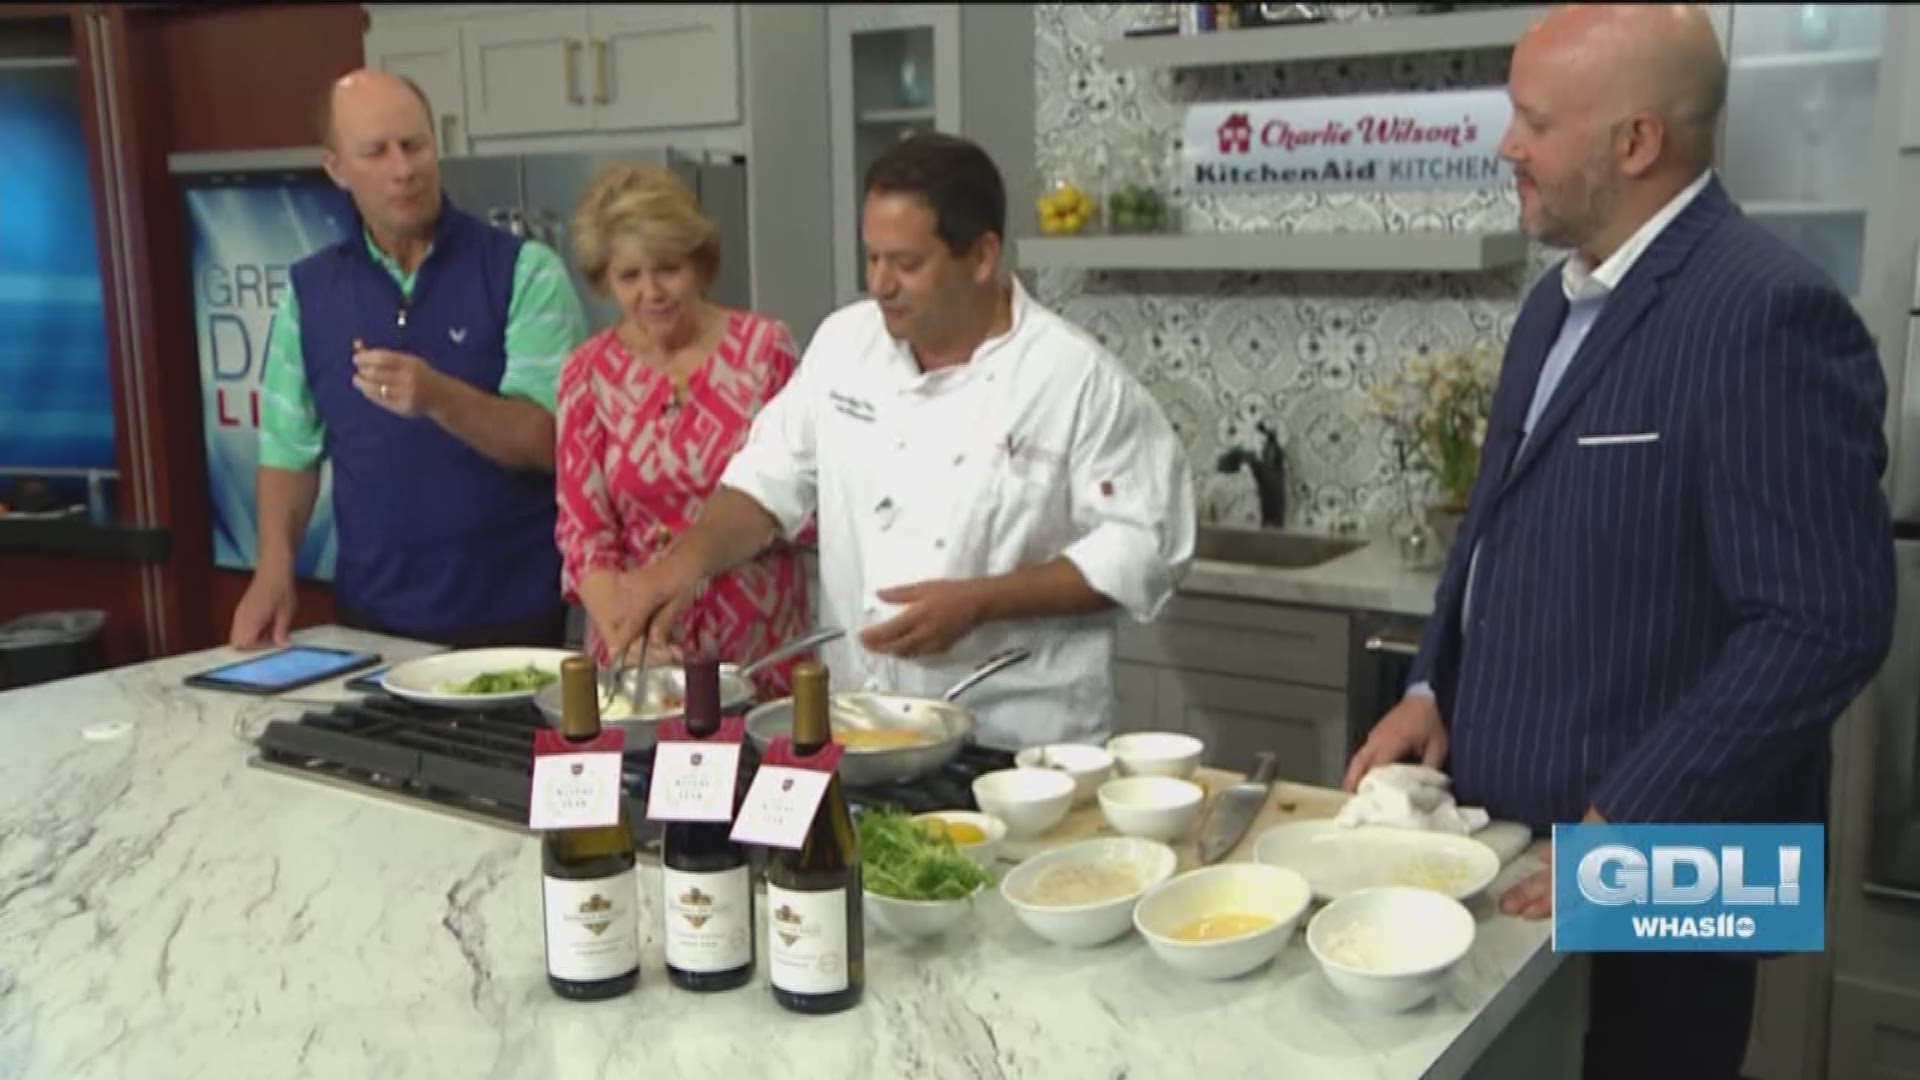 Chef John Varanese joins us in the GDL kitchen along with Ben Smith from Jackson Family Wines with details on a special six-course dinner at Varanese that will feature Master Sommelier Larry O'Brien, who will be pairing the food with wines from Jackson Fa